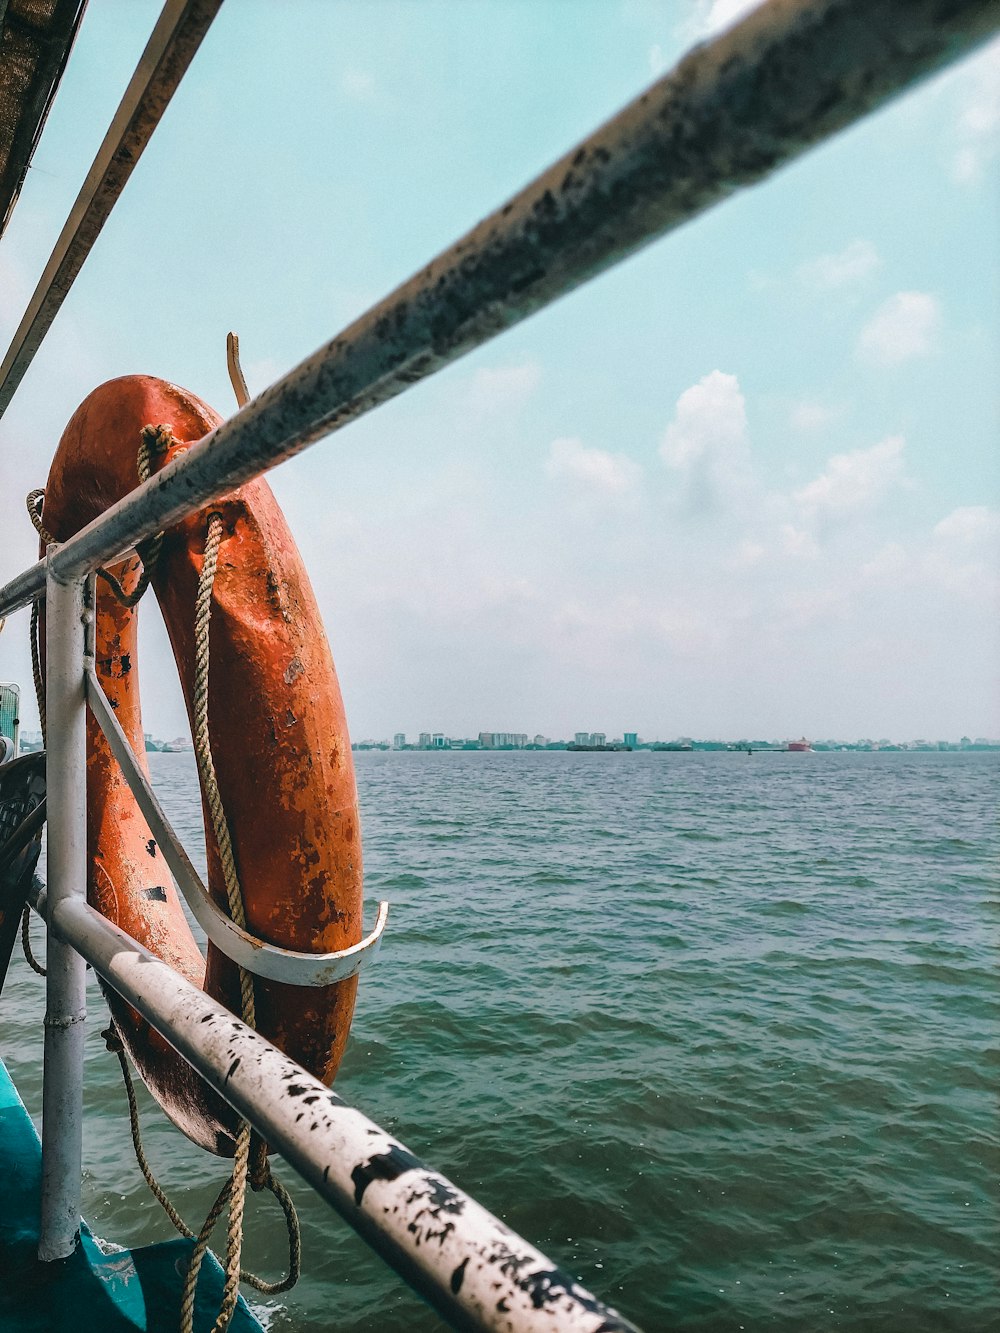 an orange life preserver on a boat in the ocean